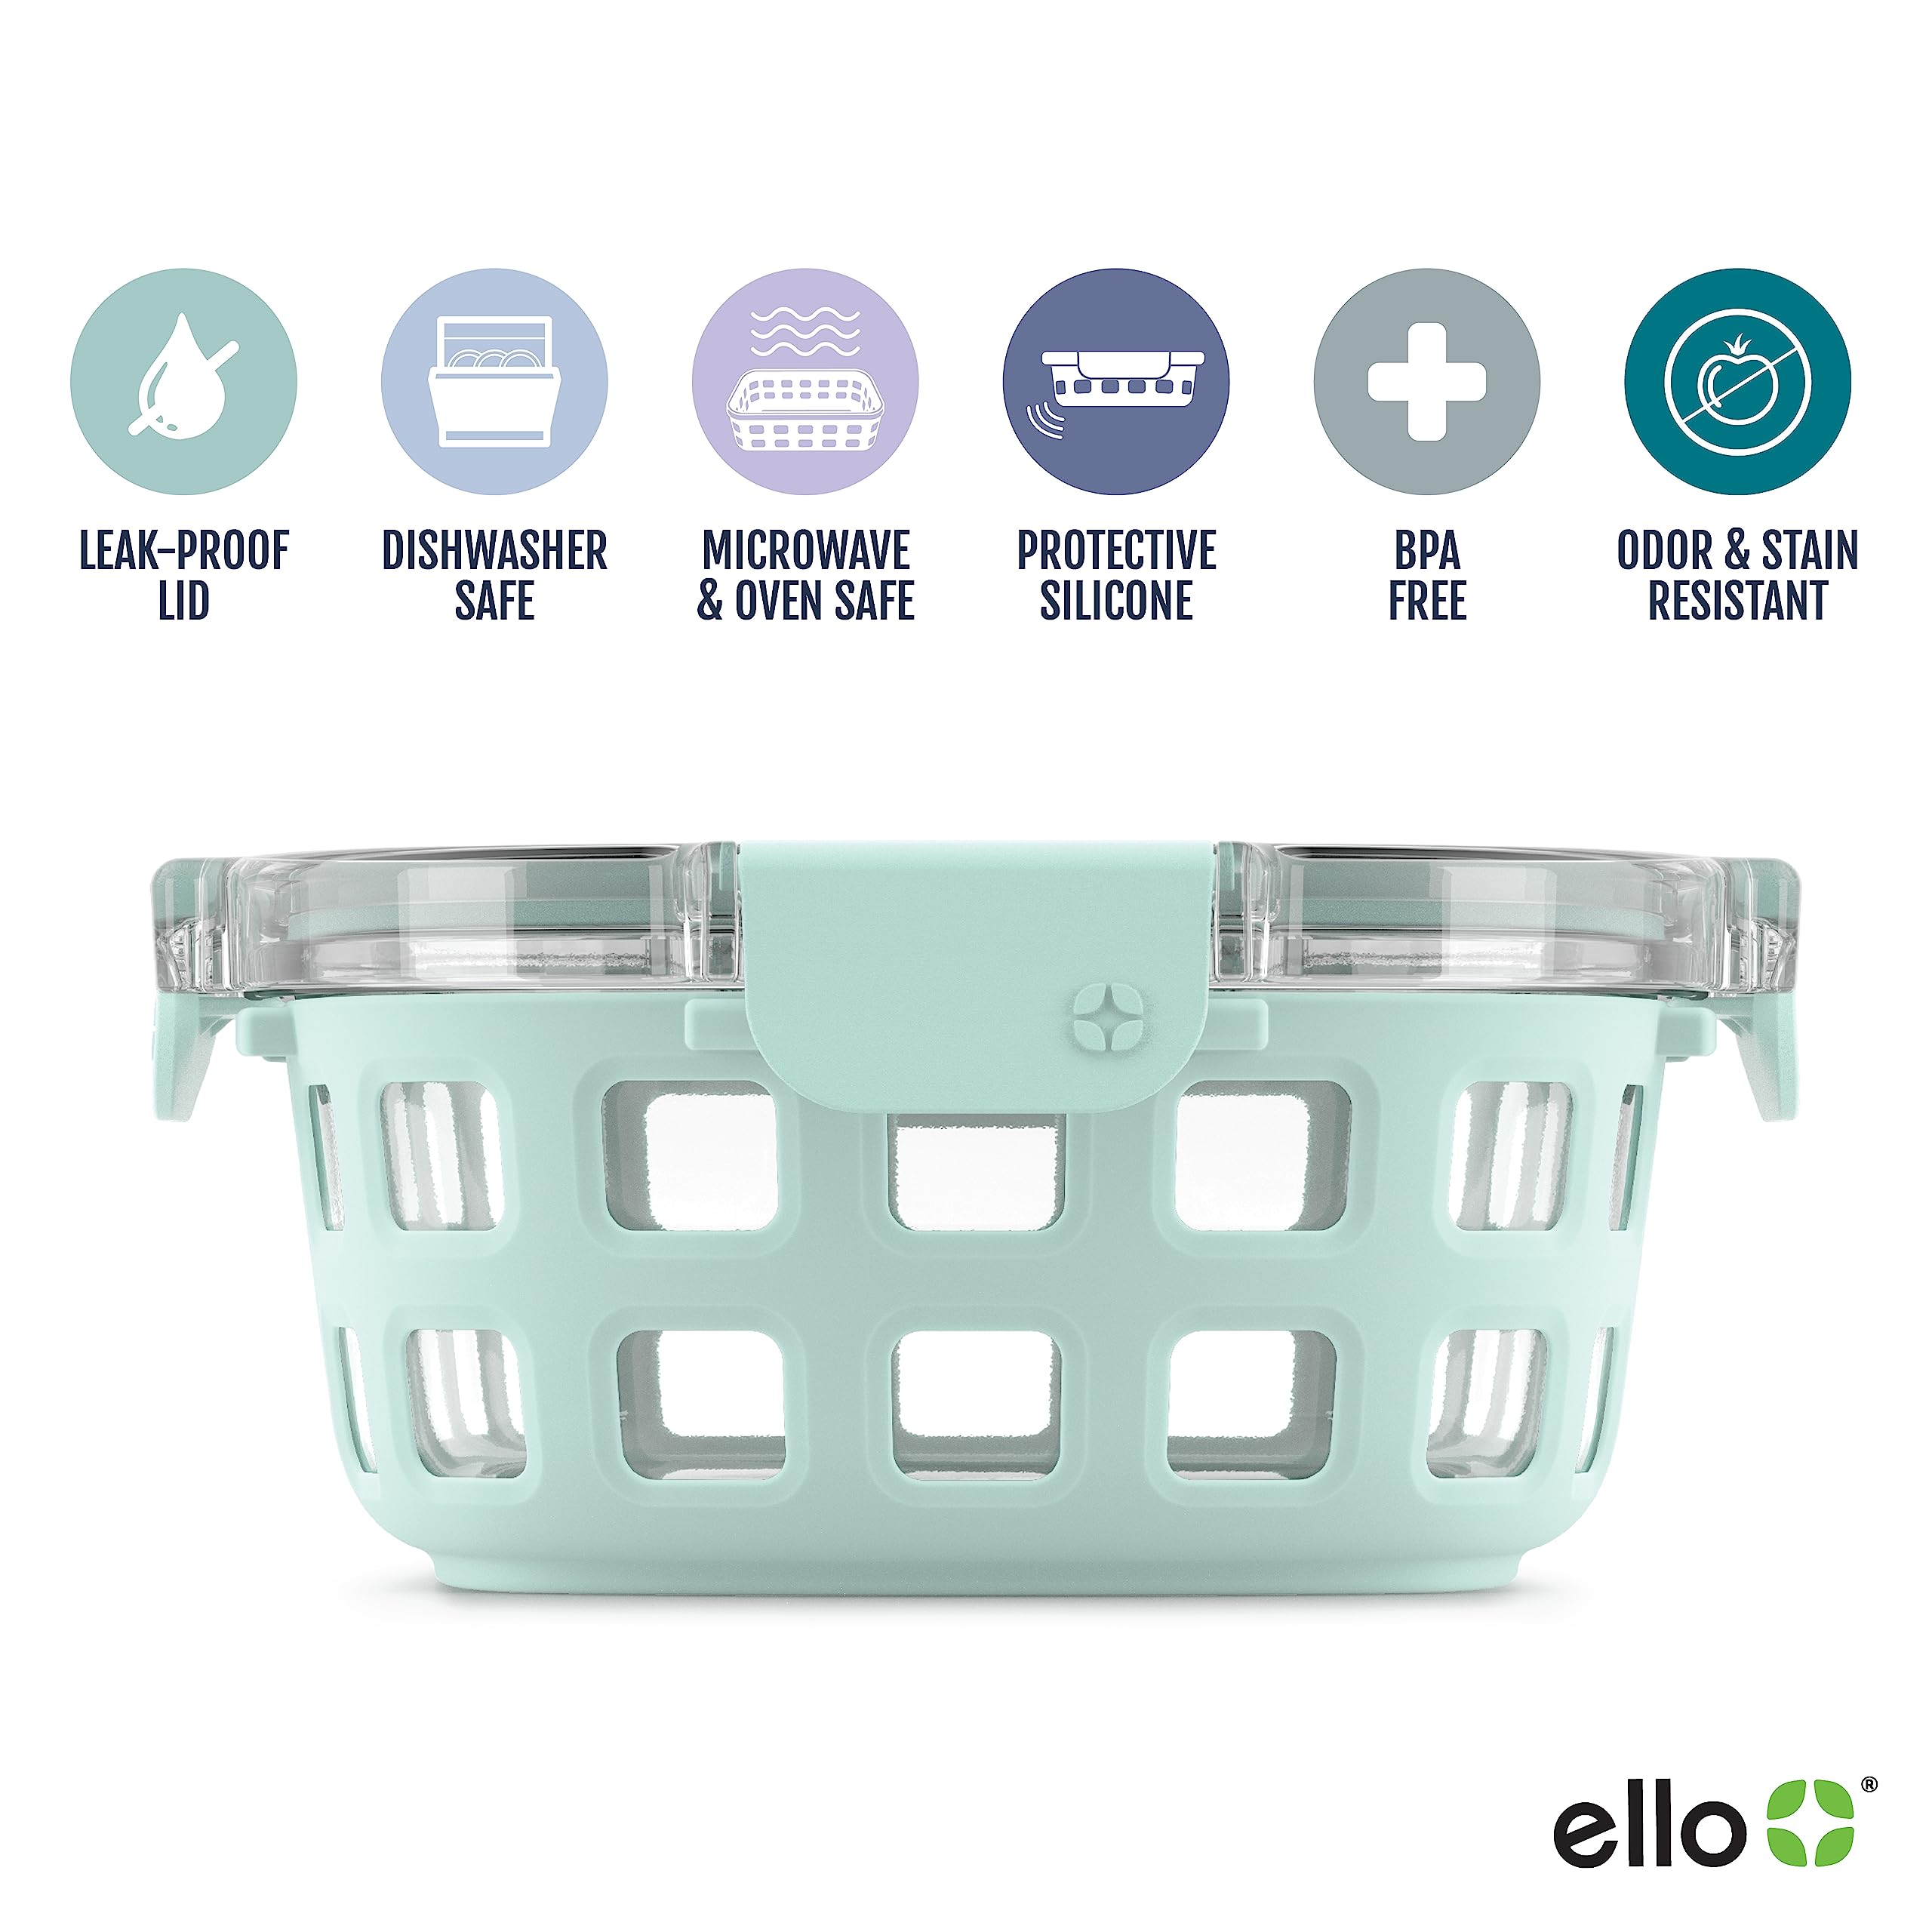 Ello Duraglass Mixed Meal Prep Set 10Pc, 5 Pack Set- Glass Food Storage Container with Silicone Sleeve and Airtight BPA-Free Plastic Lids, Dishwasher, Microwave, and Freezer Safe, Melon